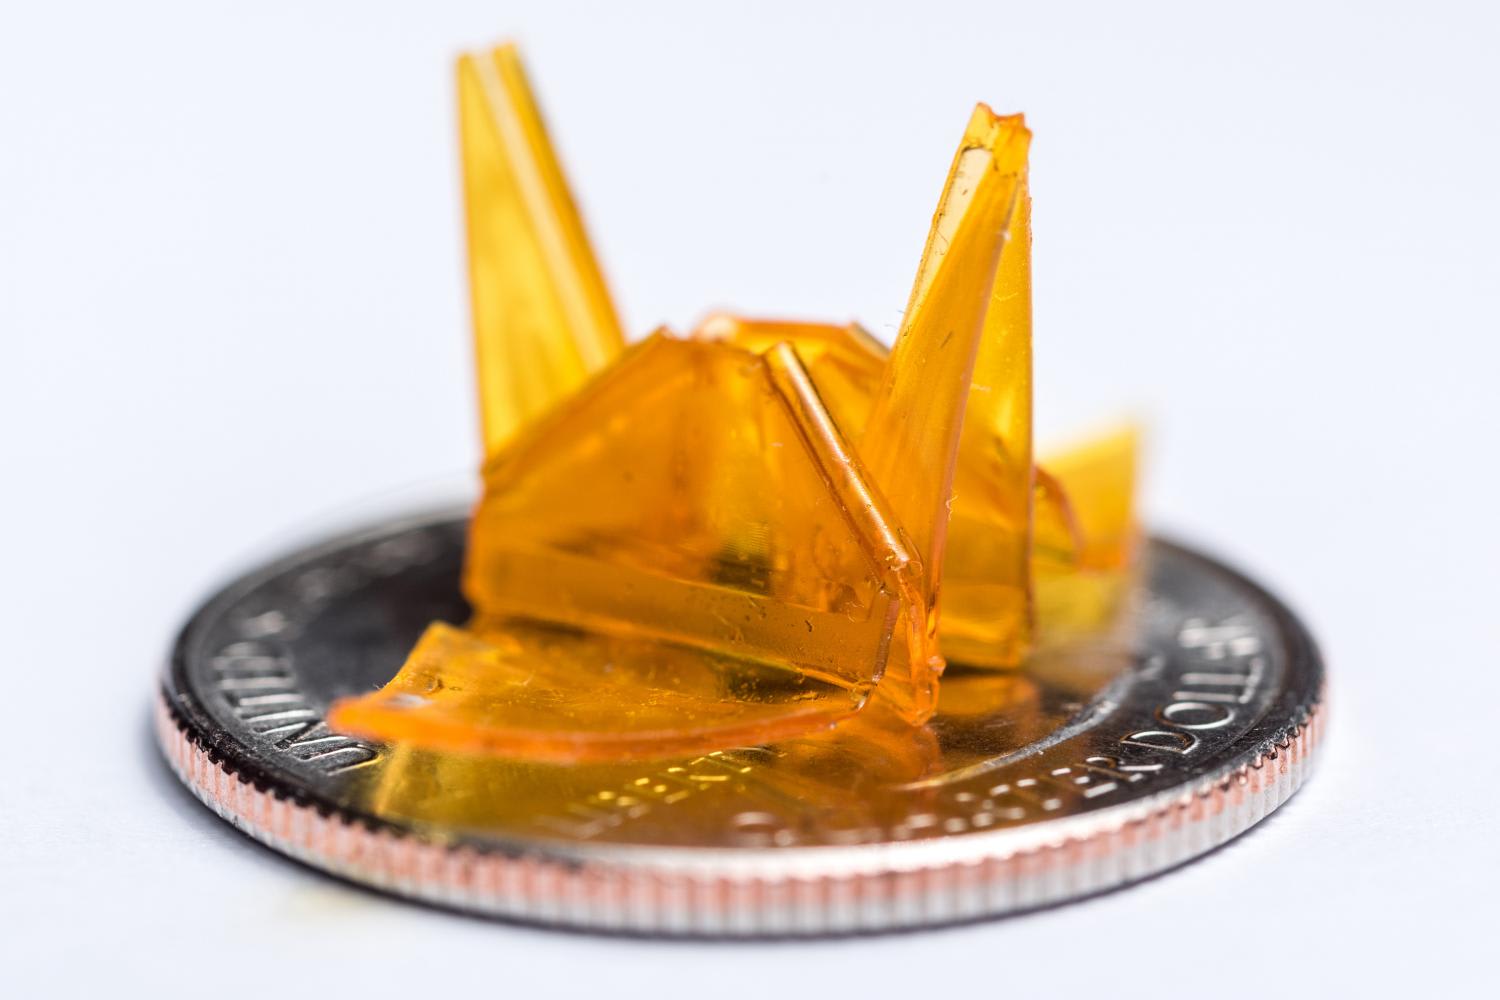 PowerPoint and LED projector enable new technique for self-folding origami